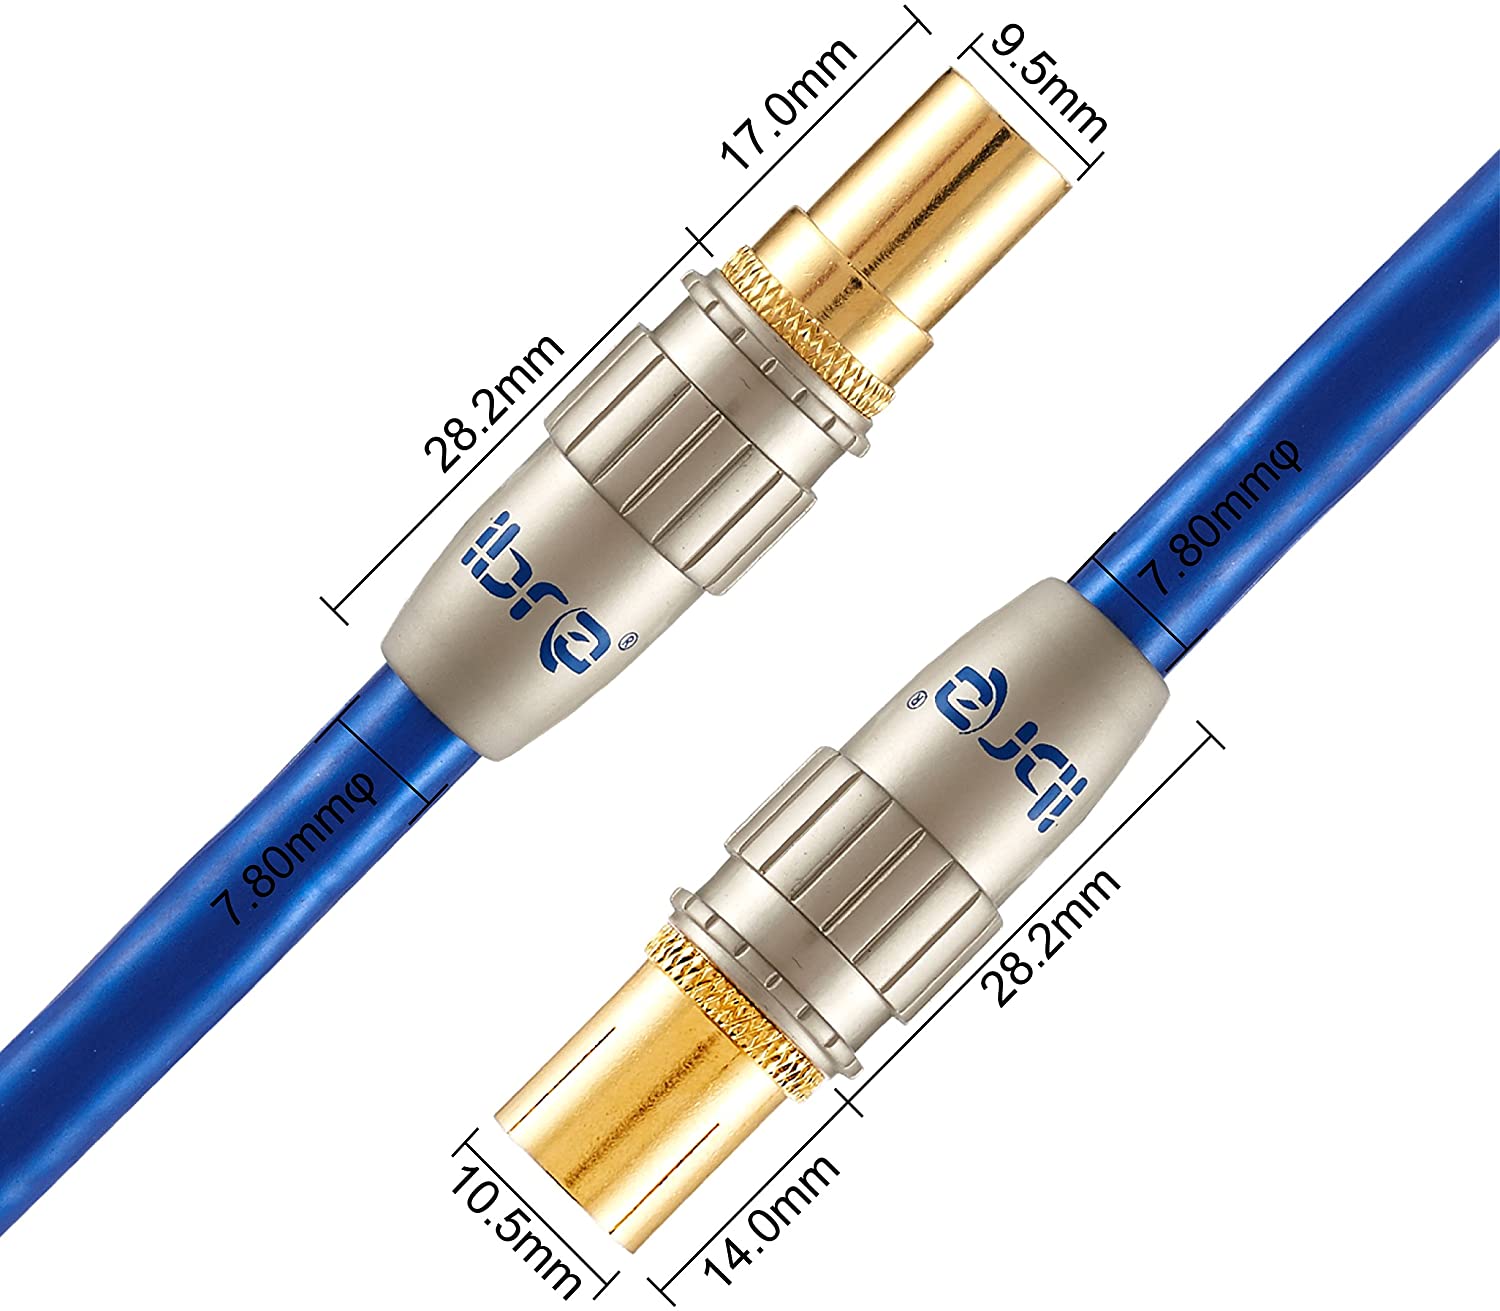 3m HDTV Antenna Cable|TV Aerial Cable|Premium Coaxial Cable|Connectors: Coax Male to Coax Female|For UHF/RF/DVB-T/DVB-T2 TVs, VCRs, DVD players, DVRs, cable boxes and satellite| IBRA Blue Gold